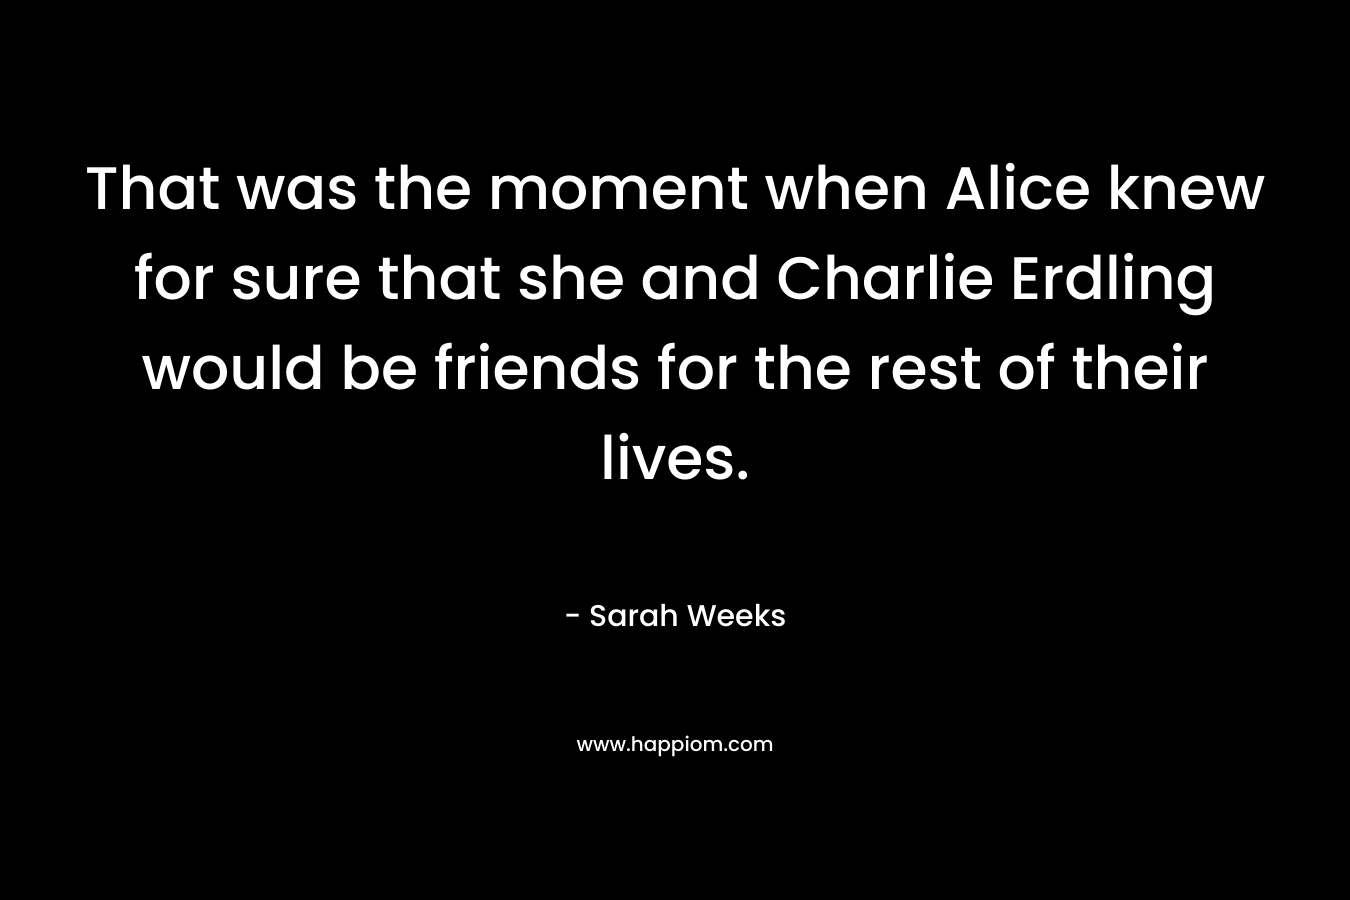 That was the moment when Alice knew for sure that she and Charlie Erdling would be friends for the rest of their lives.